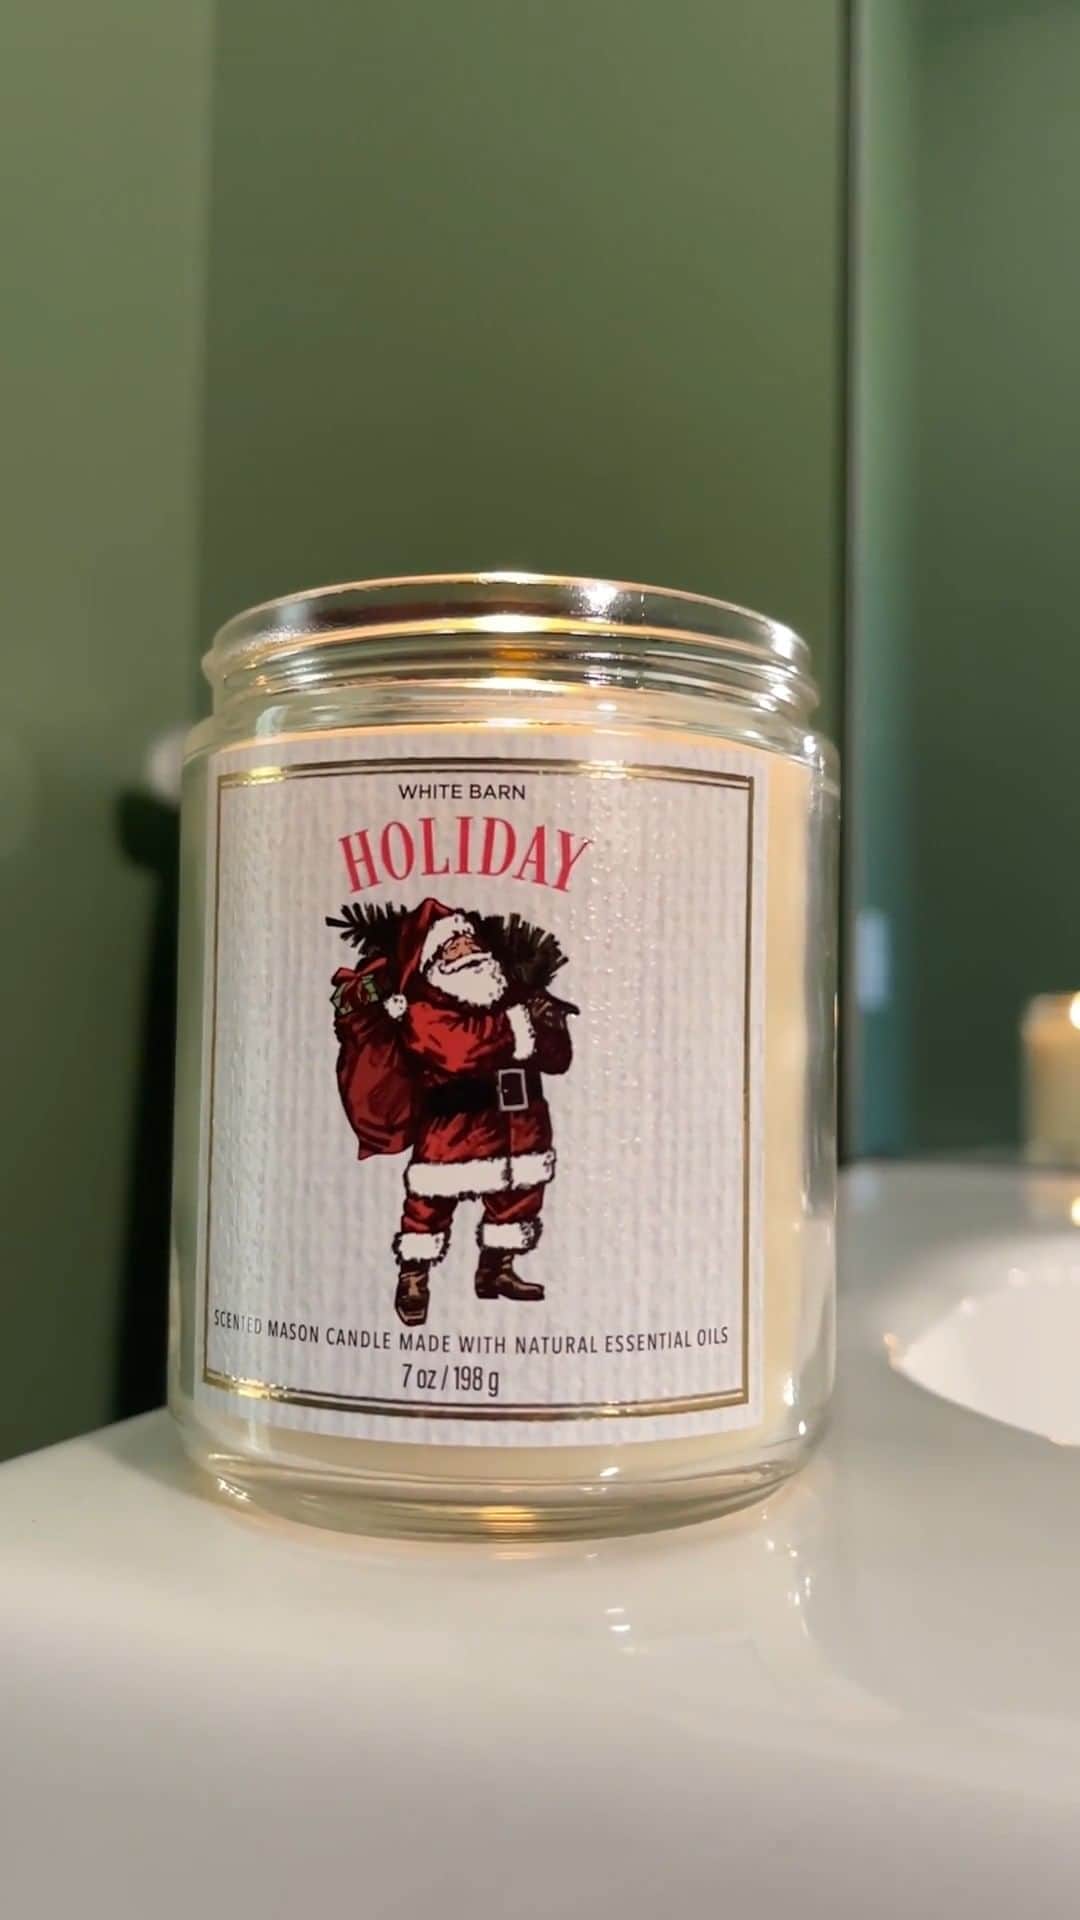 Bath & Body Worksのインスタグラム：「⏰ IT'S TIIIIIME!! ⏰ Deck the halls with $5.50 Single Wick Candles! 🎄  🗓️ OCT 25-26 🤑 LOWEST PRICE OF THE SEASON 🤩 ALL Signature Single Wick + Mason Jar Candles 😍 Over 40 fragrances to choose from!」